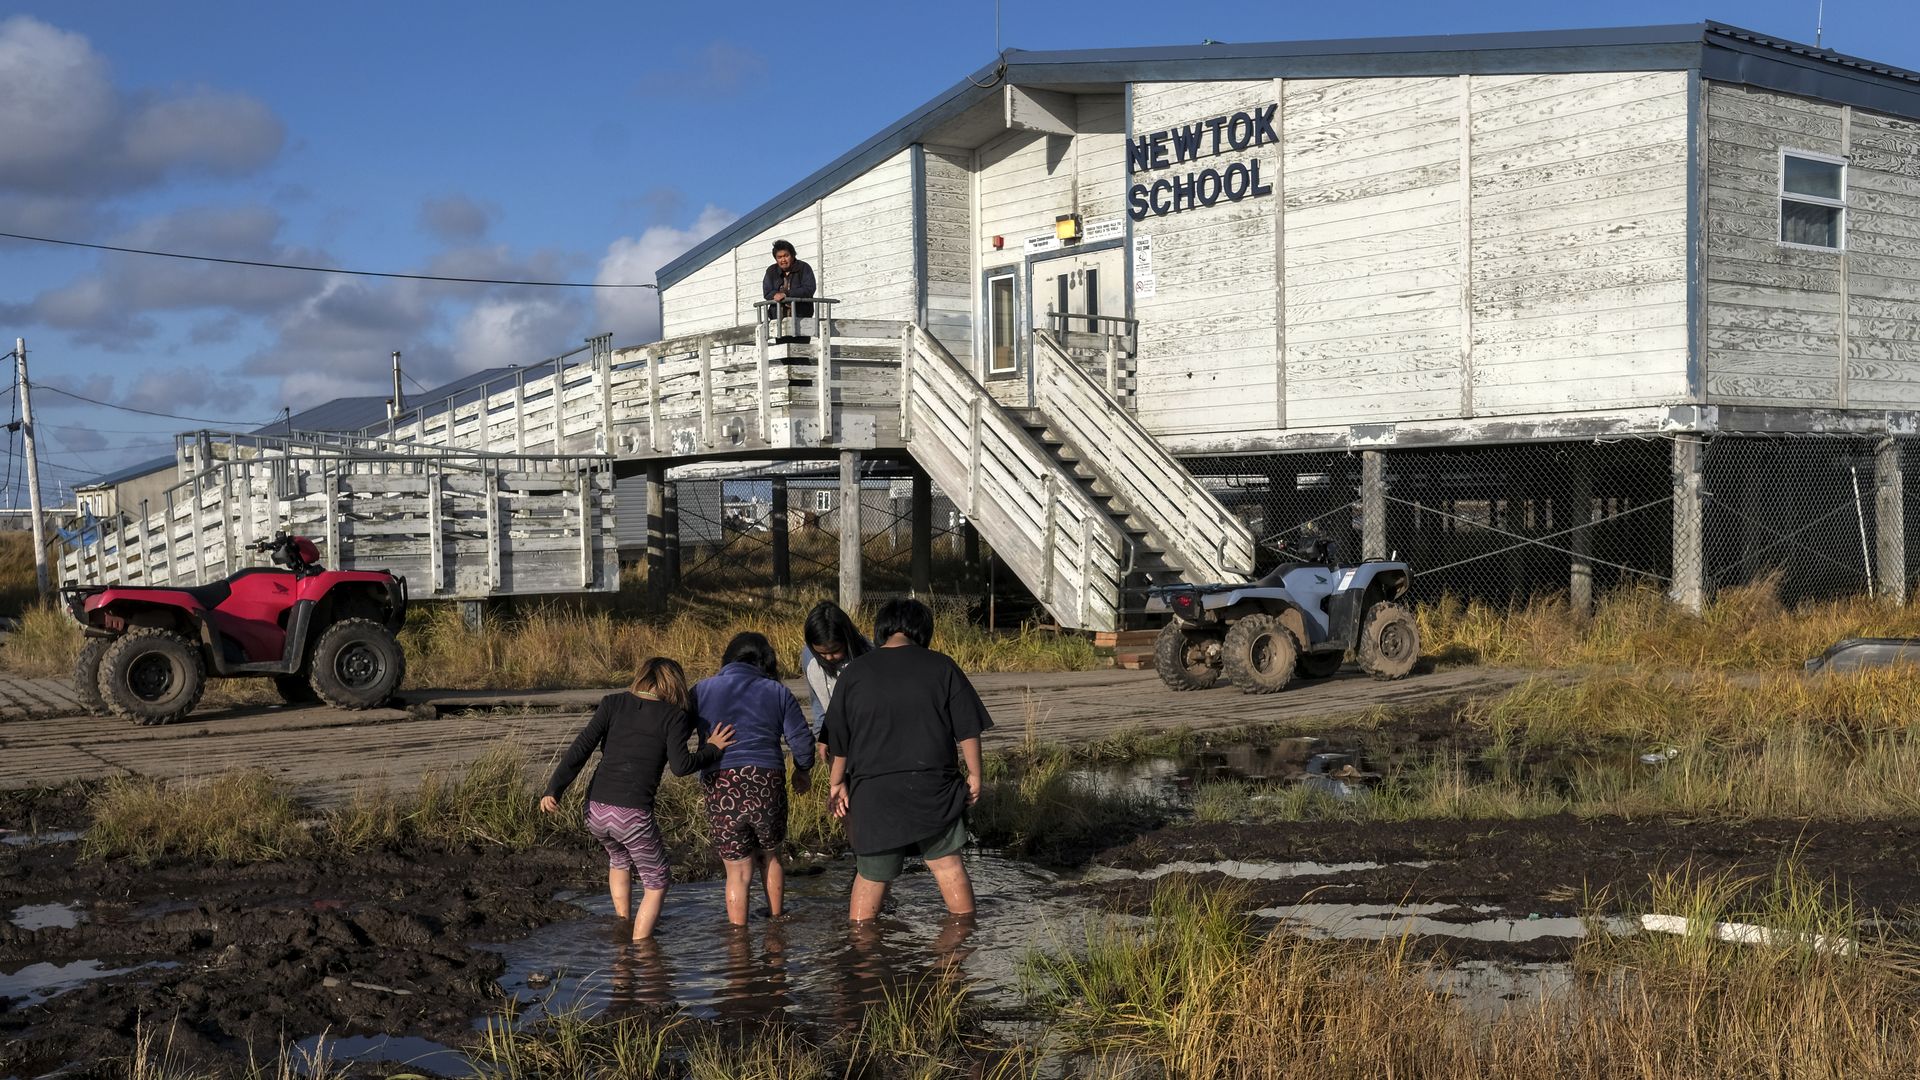 In this image, a group of children stand in the mud outside a white building that says "school"